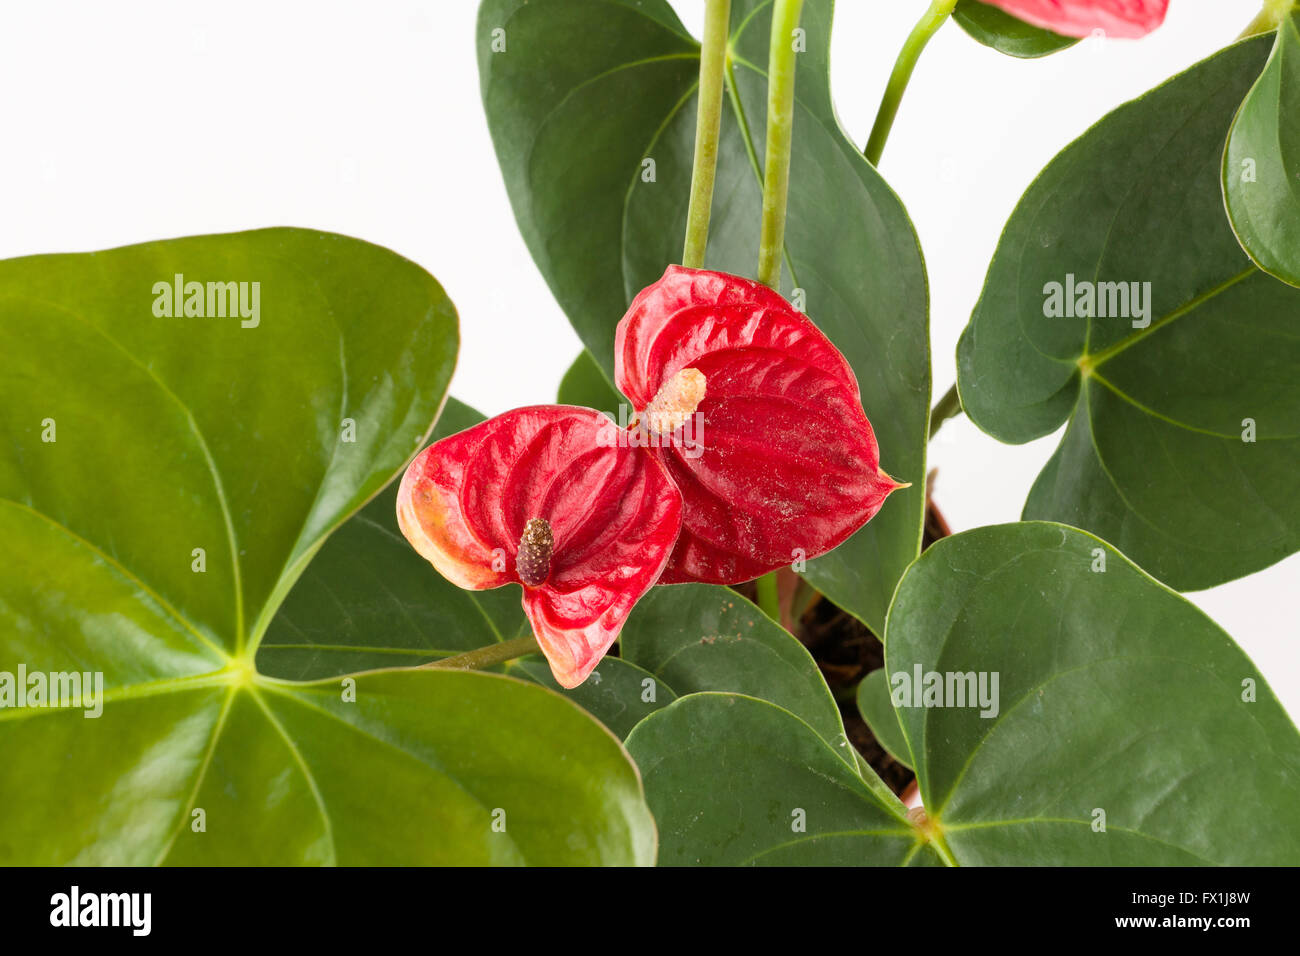 Anthurium a flowering plant with beautiful flowers on a white background Stock Photo